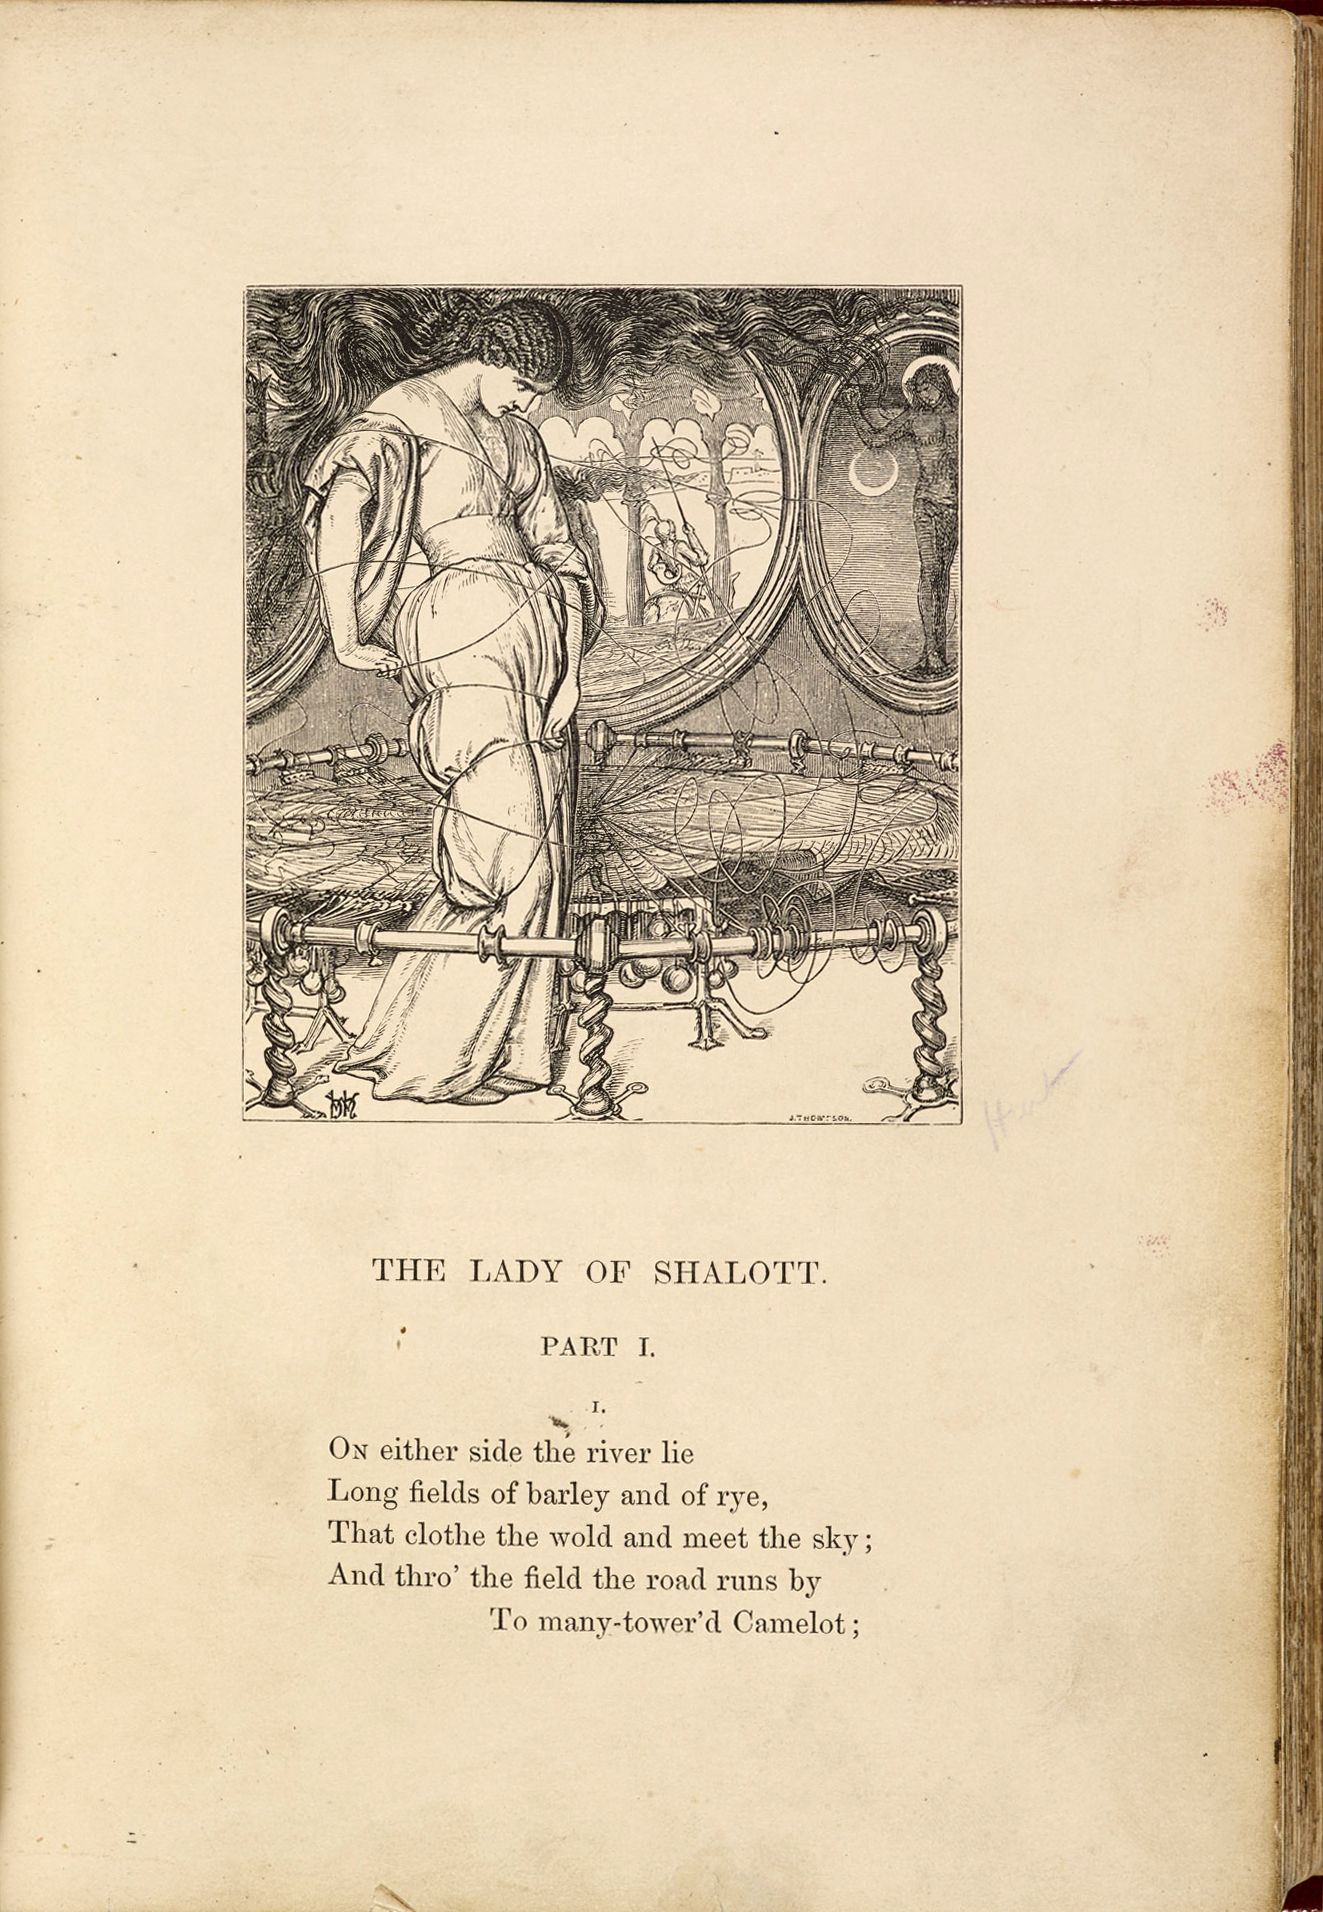 William Holman Hunt’s illustration of The Lady of Shallot, Moxon edition of Tennyson’s Poems, 1857 (The British Library)